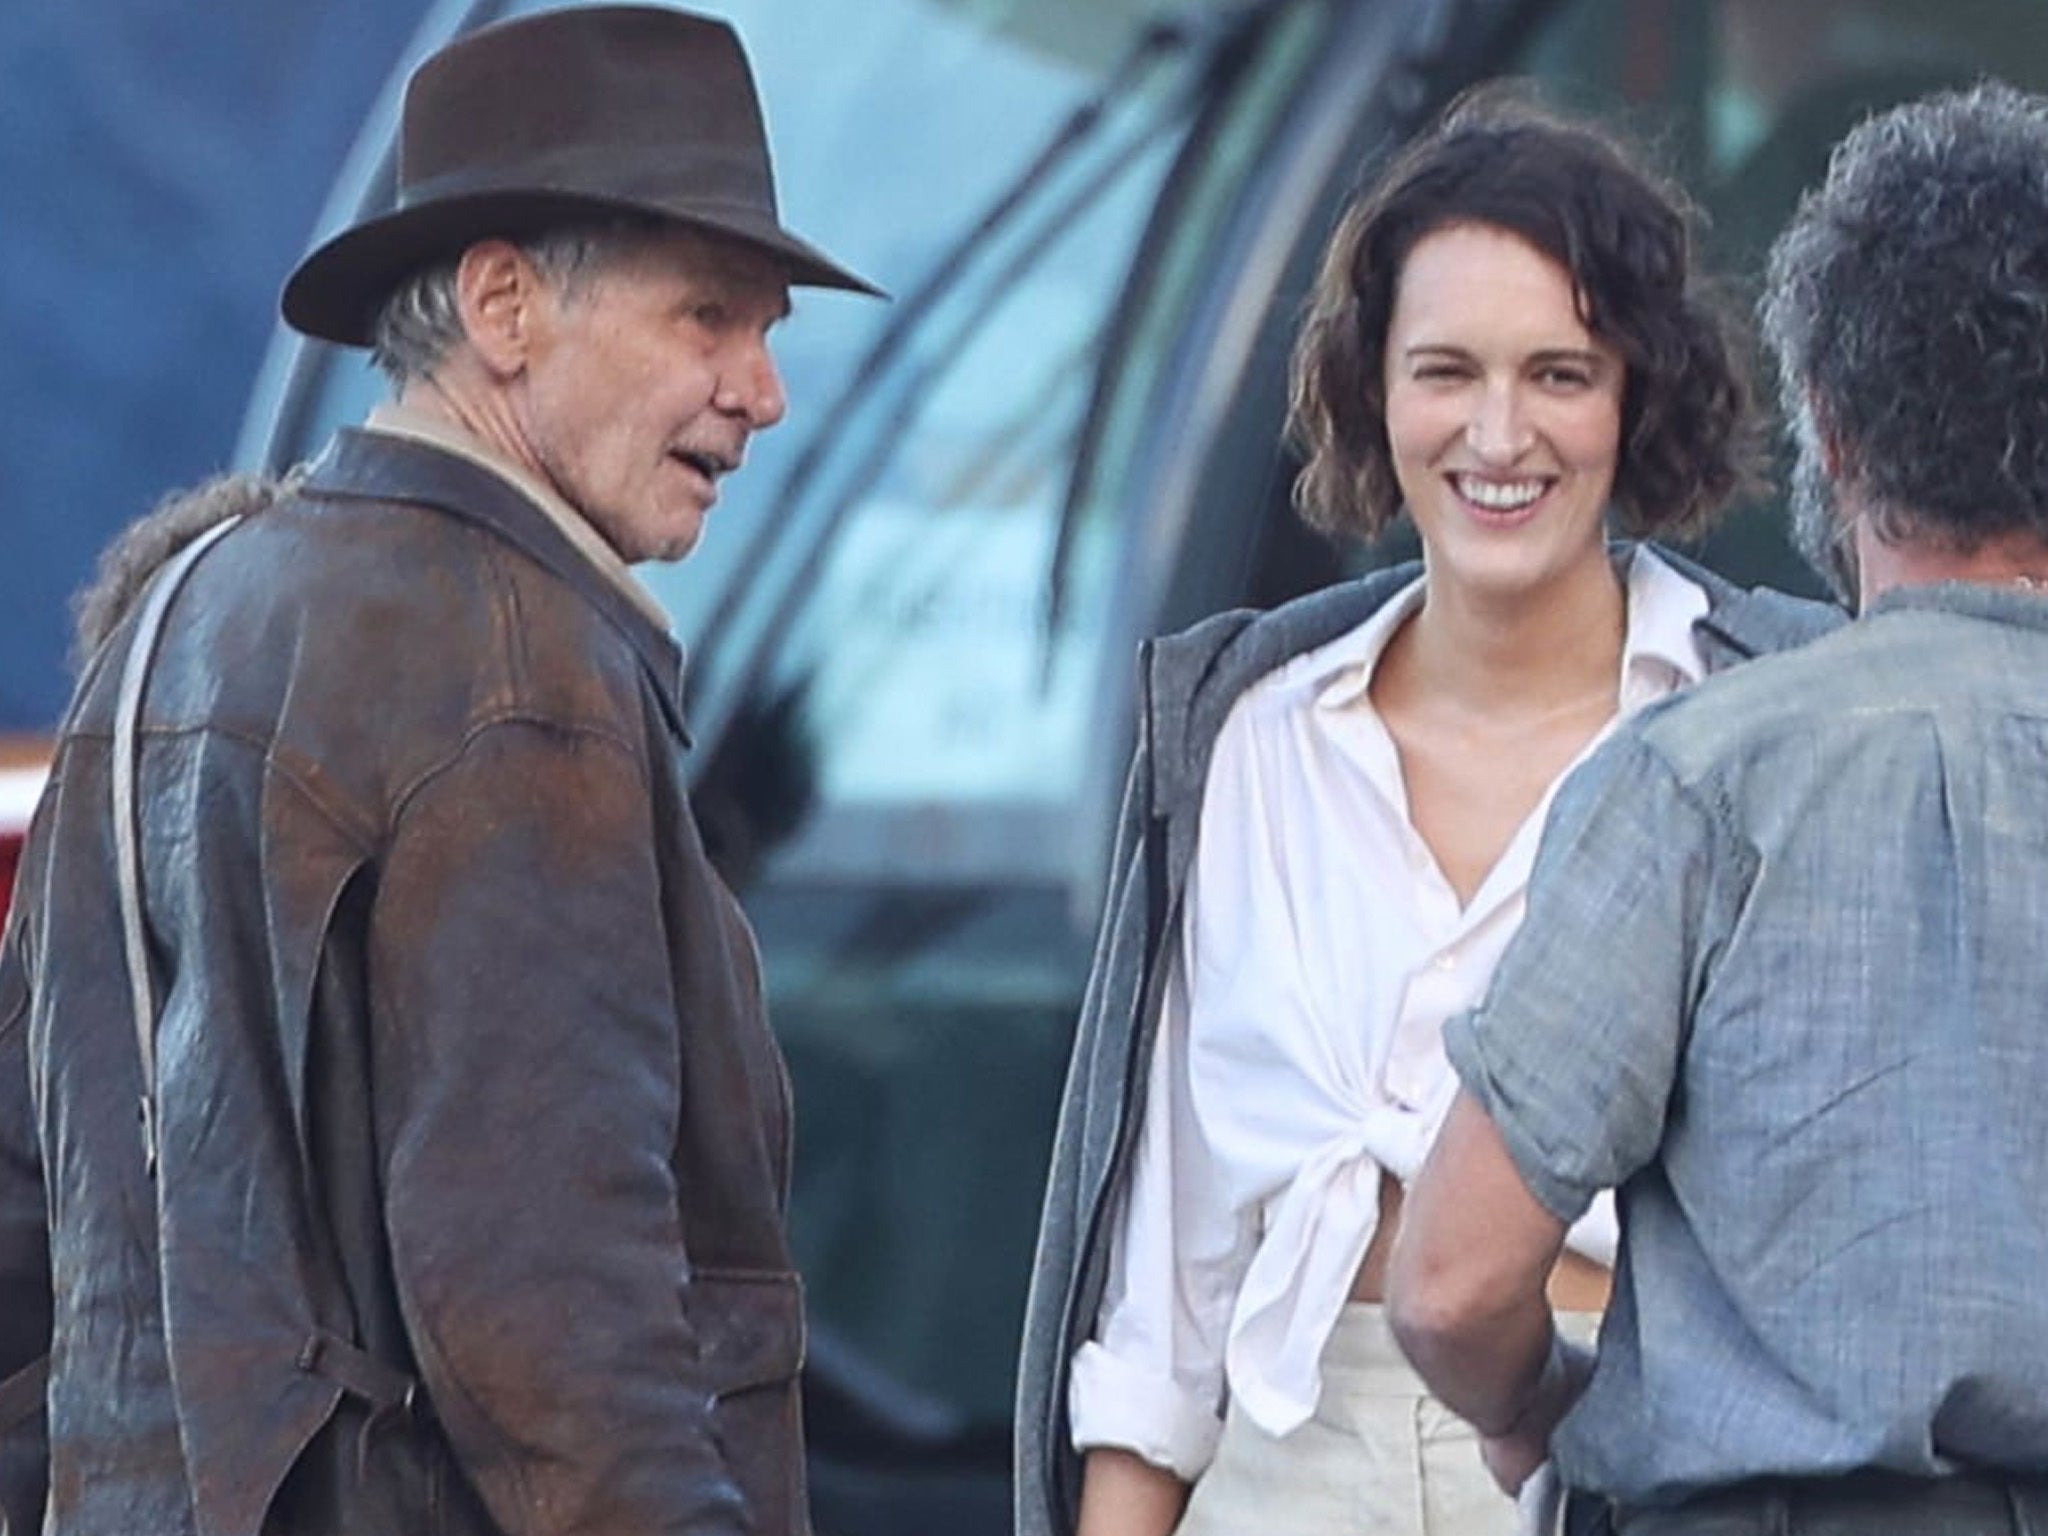 Harrison Ford and Phoebe Waller-Bridge on the set of ‘Indiana Jones 5’ – the film is out next summer